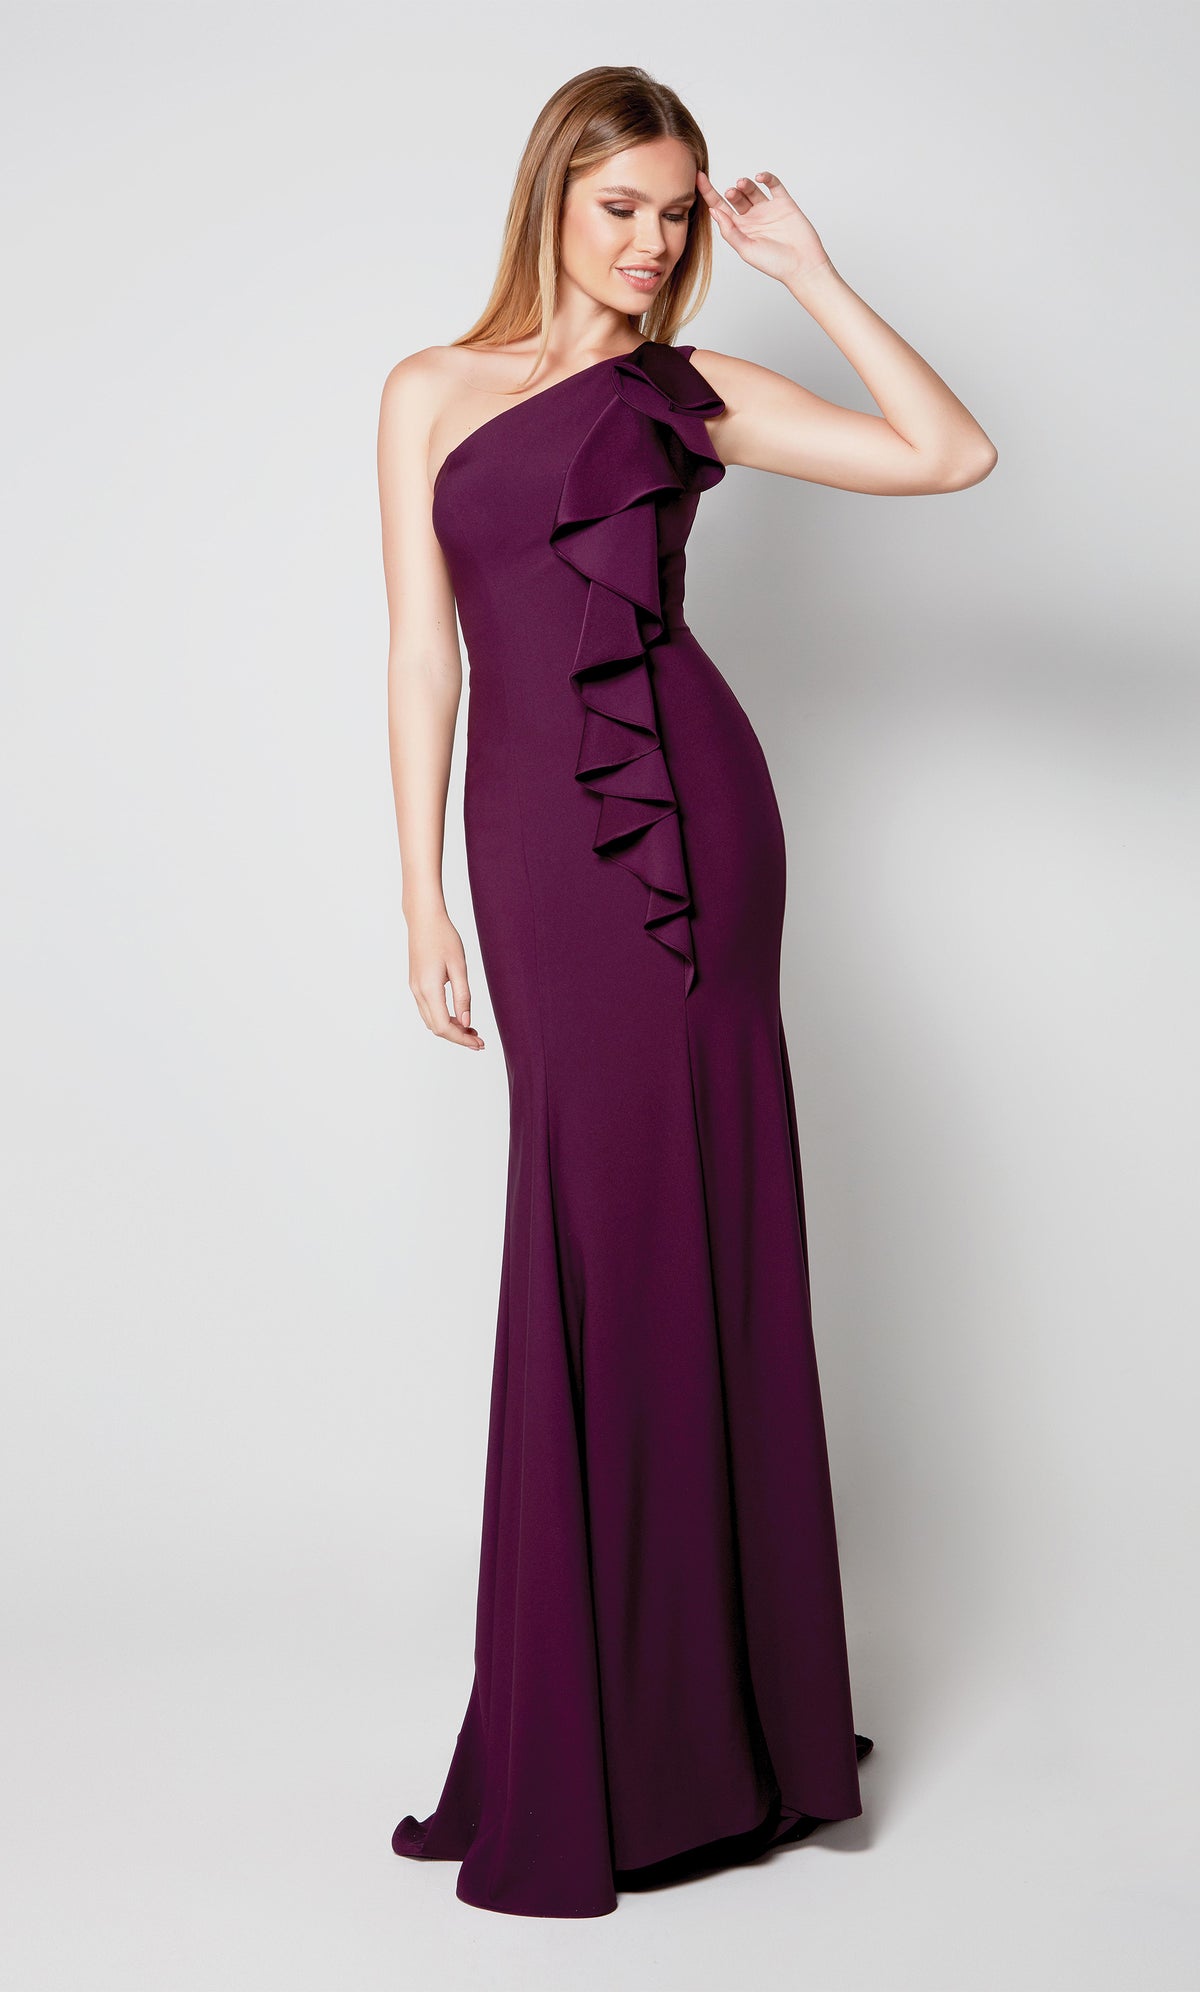 Long one shoulder mother of the bride dress with ruffle design.